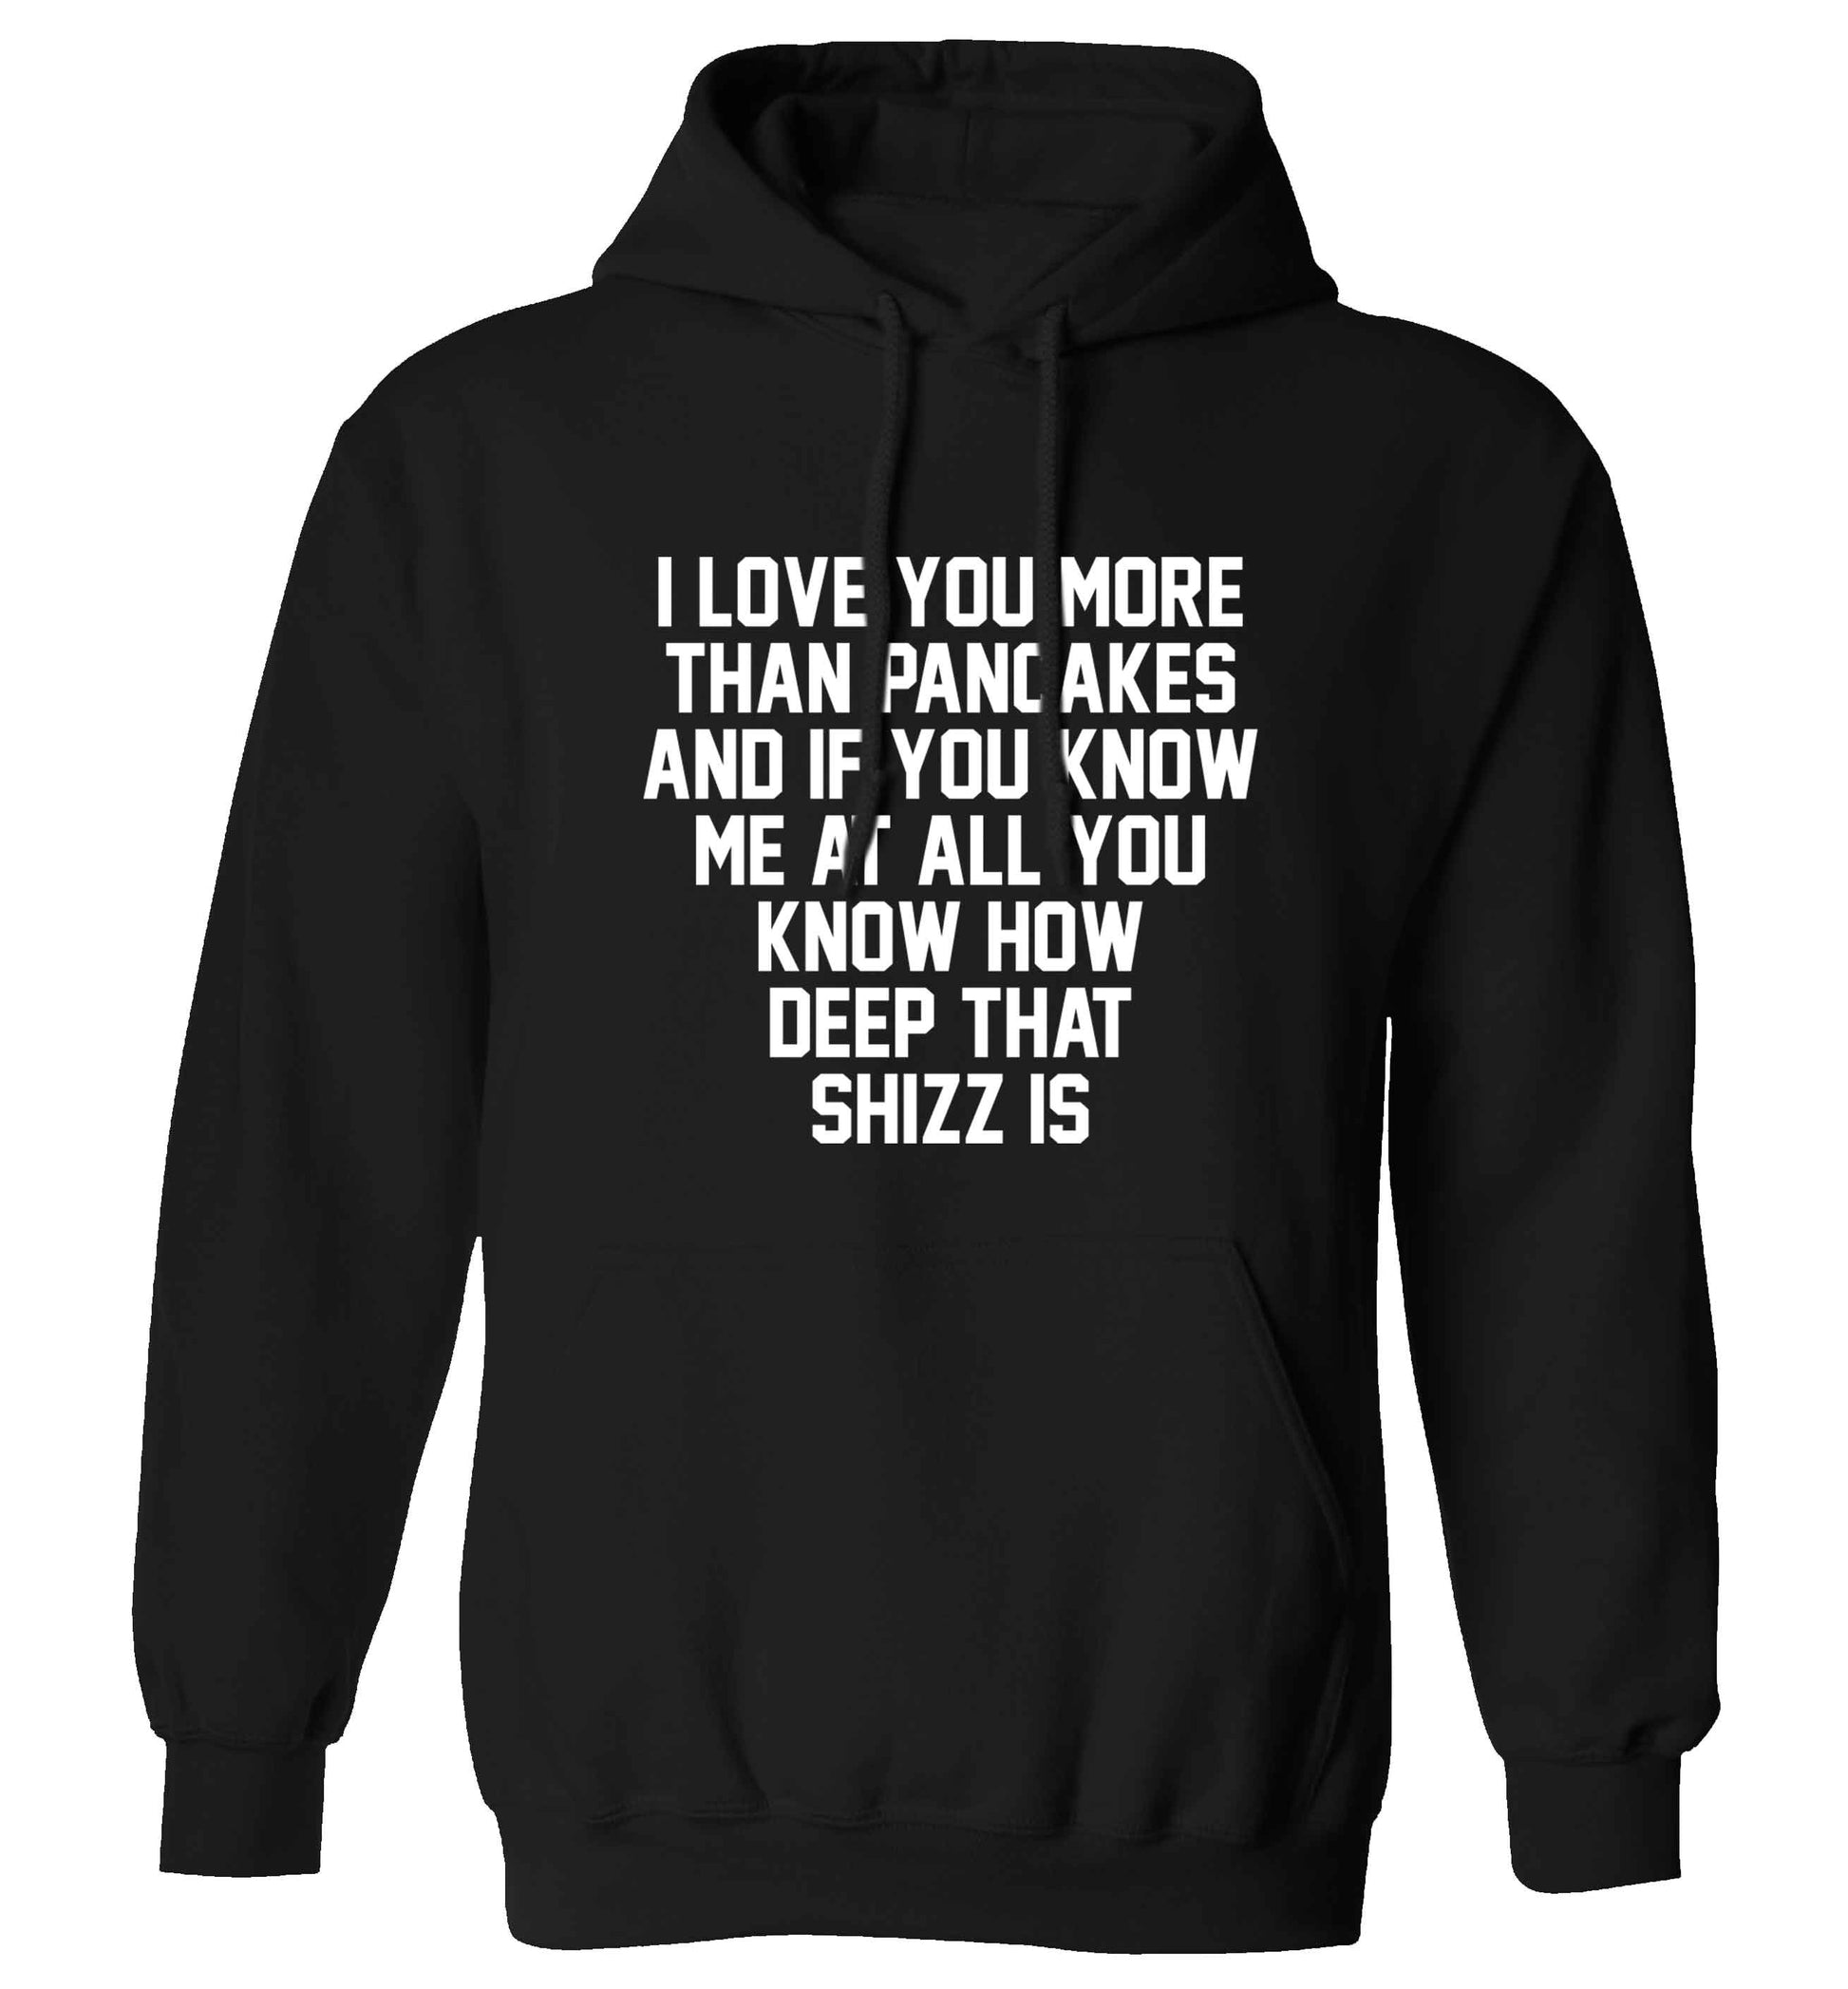 I love you more than pancakes and if you know me at all you know how deep that shizz is adults unisex black hoodie 2XL